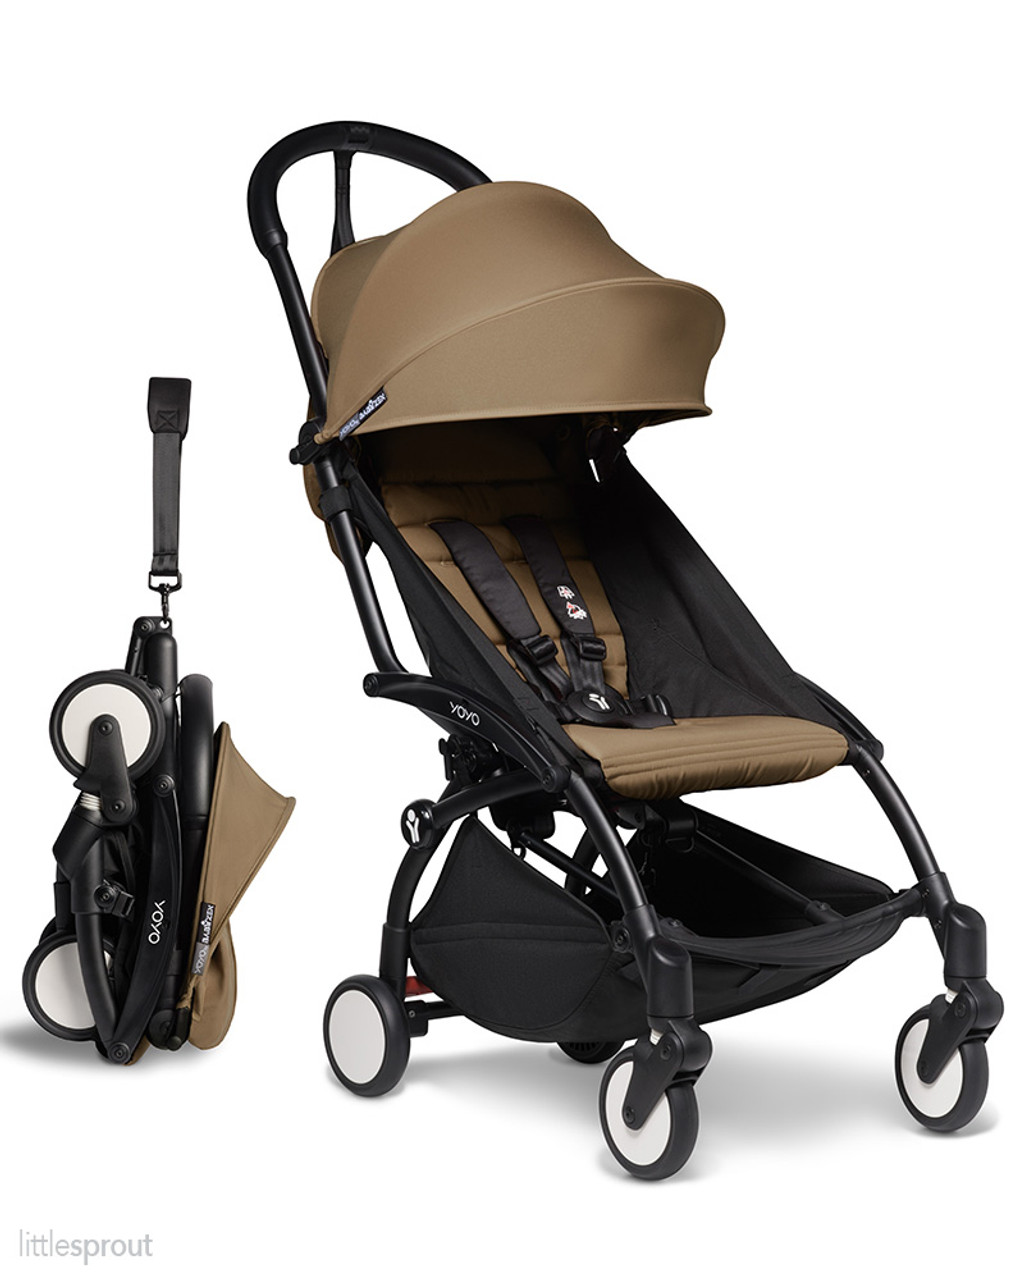 Car Seats Compatible With the Babyzen YOYO2 Stroller 